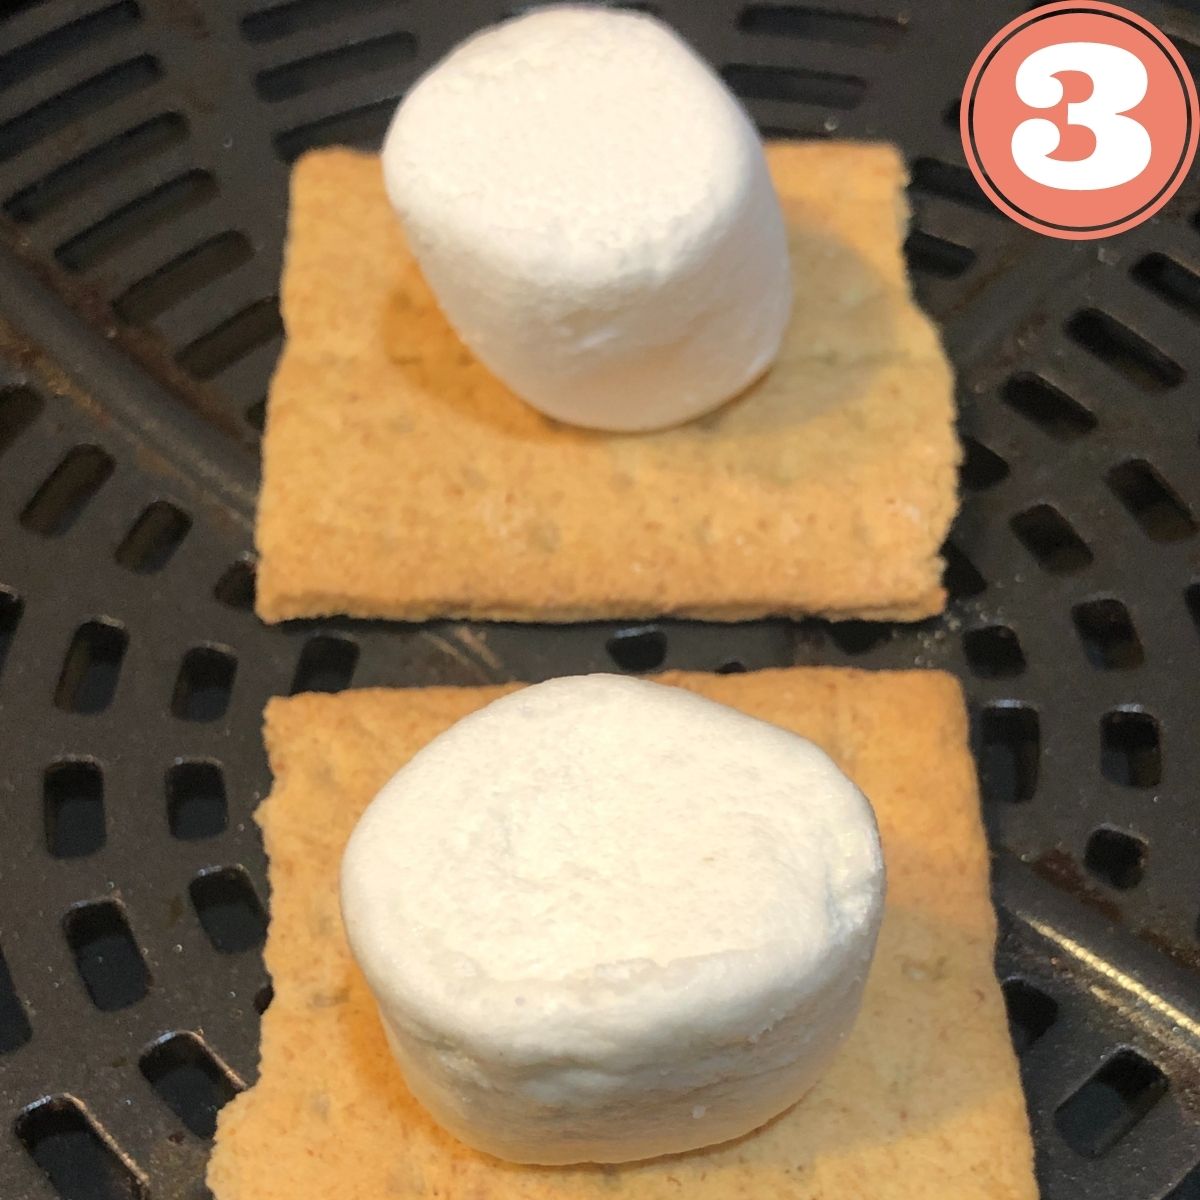 Two graham crackers with a marshmallow on top sitting in an air fryer basket